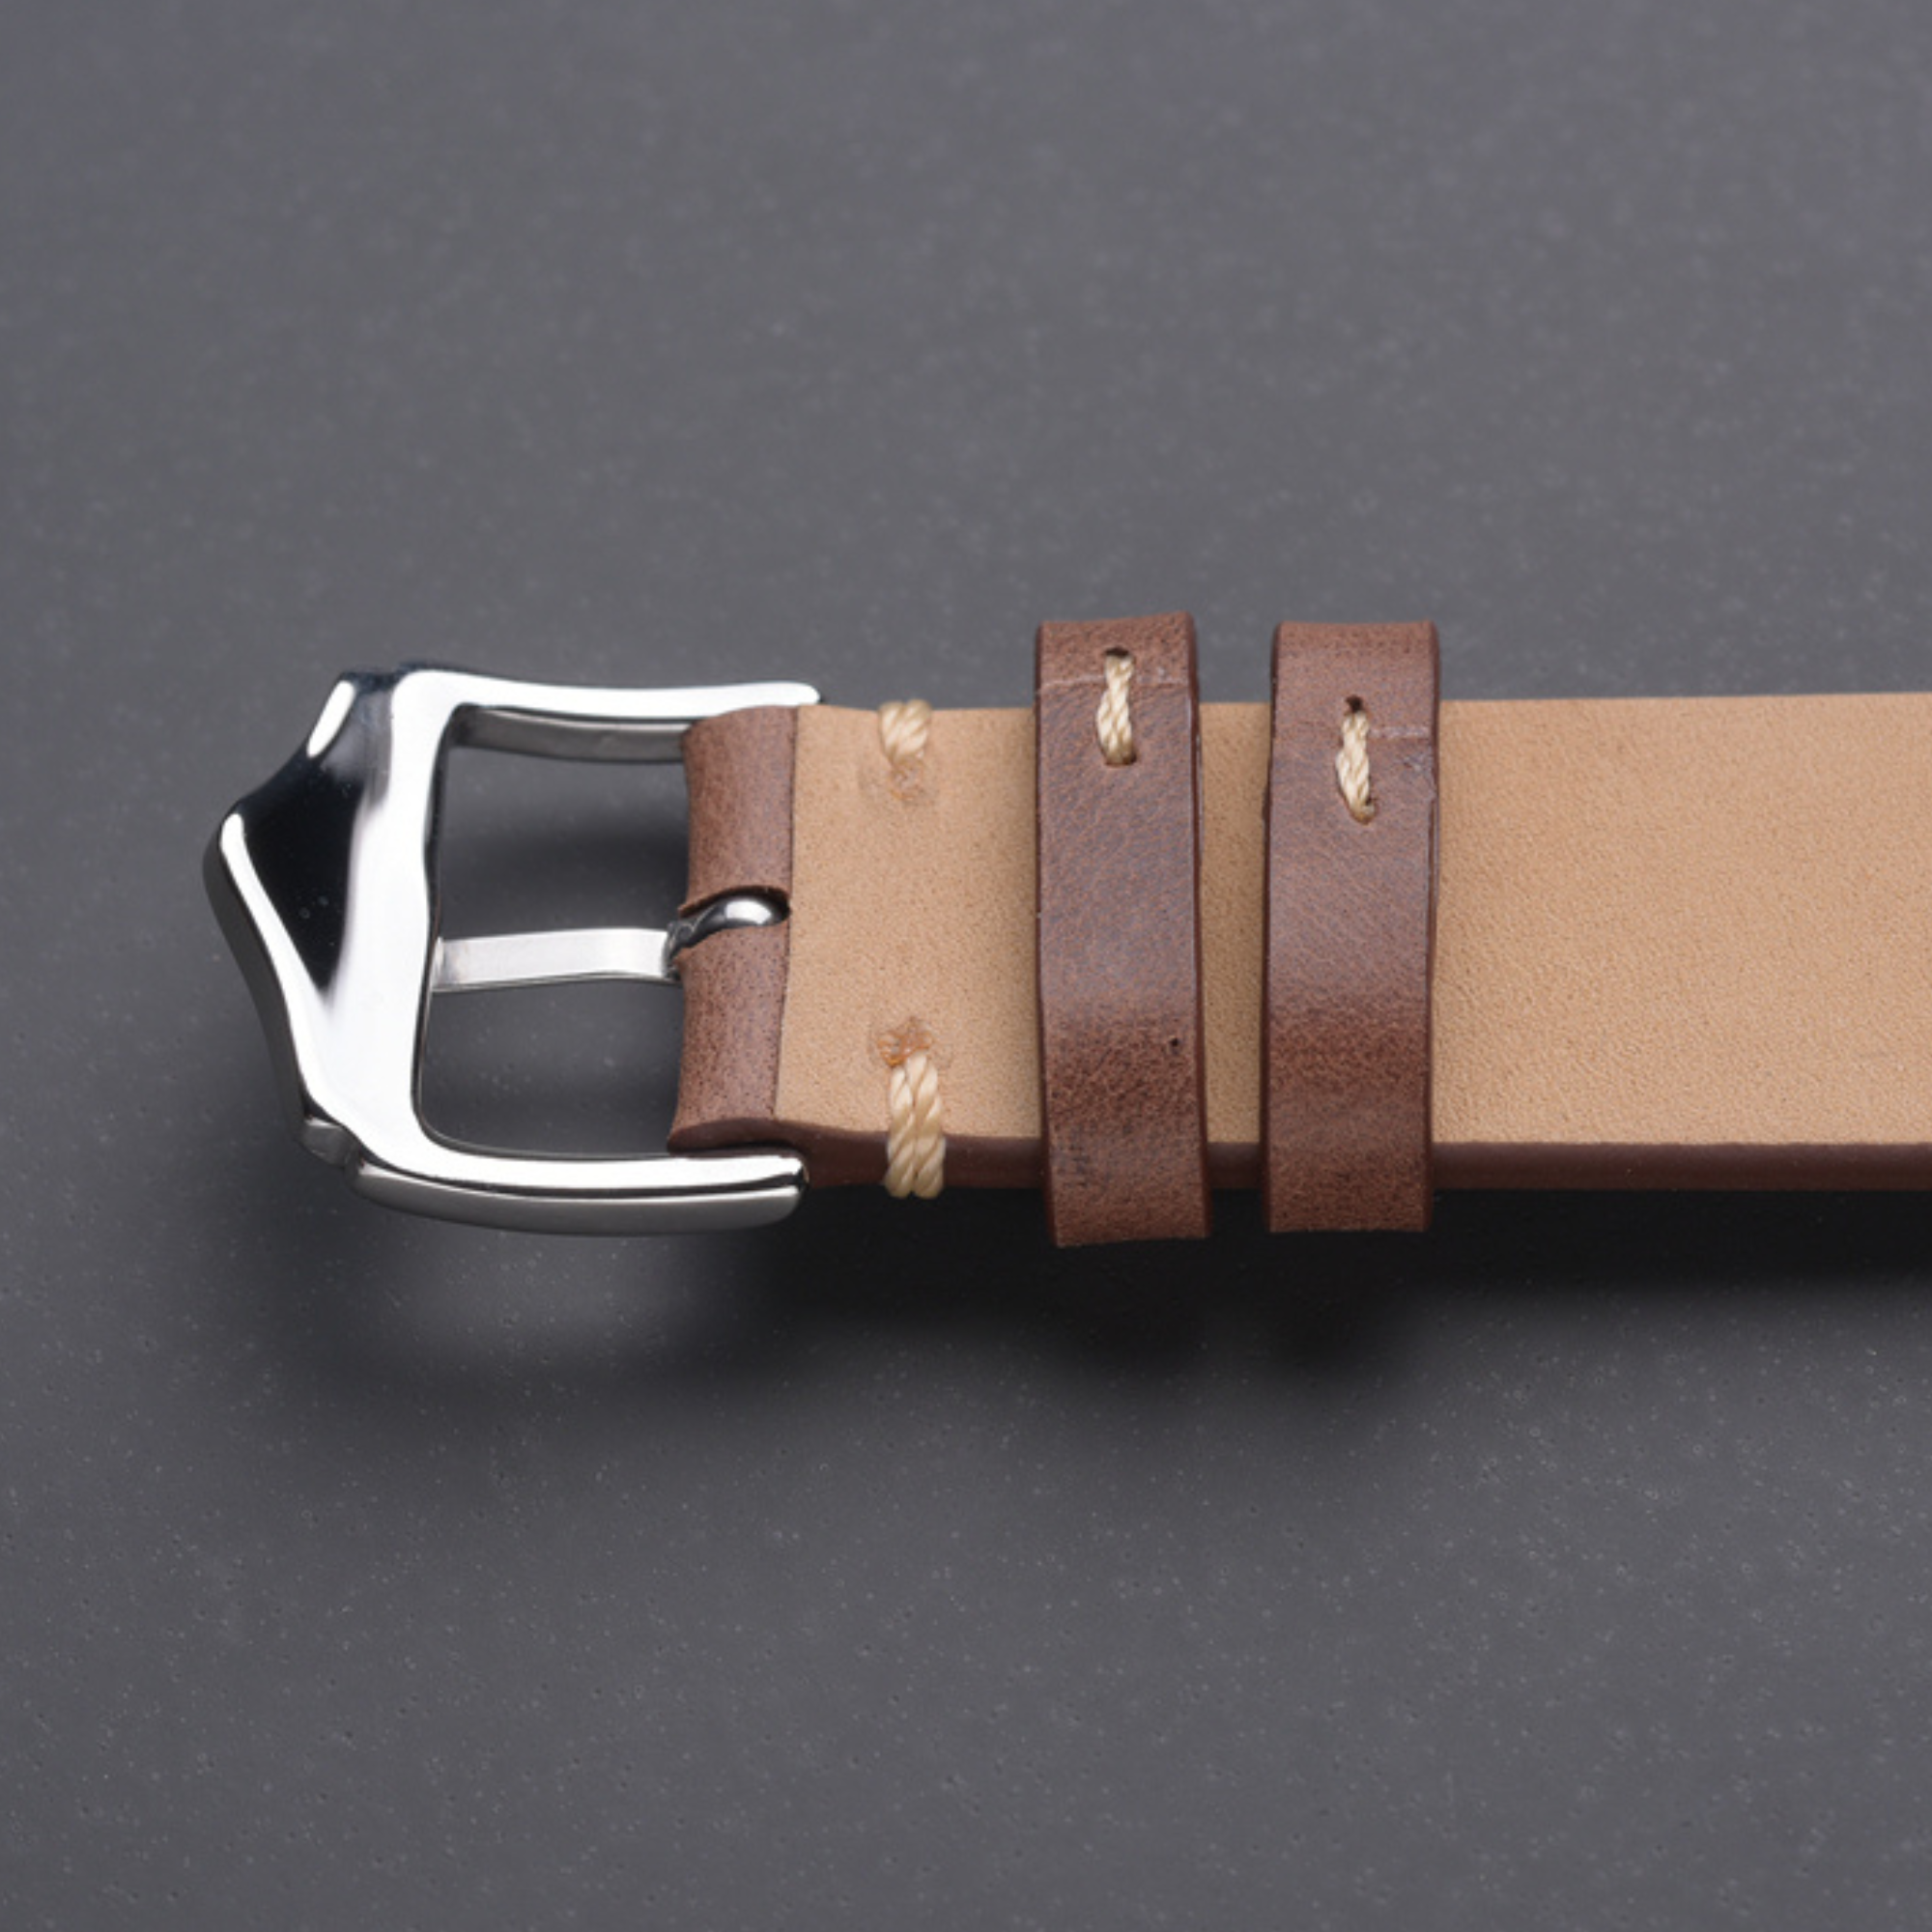 Genuine Leather Watch Strap Watchband Accessories 20mm - Light Brown watch leather strap band india online dream watches